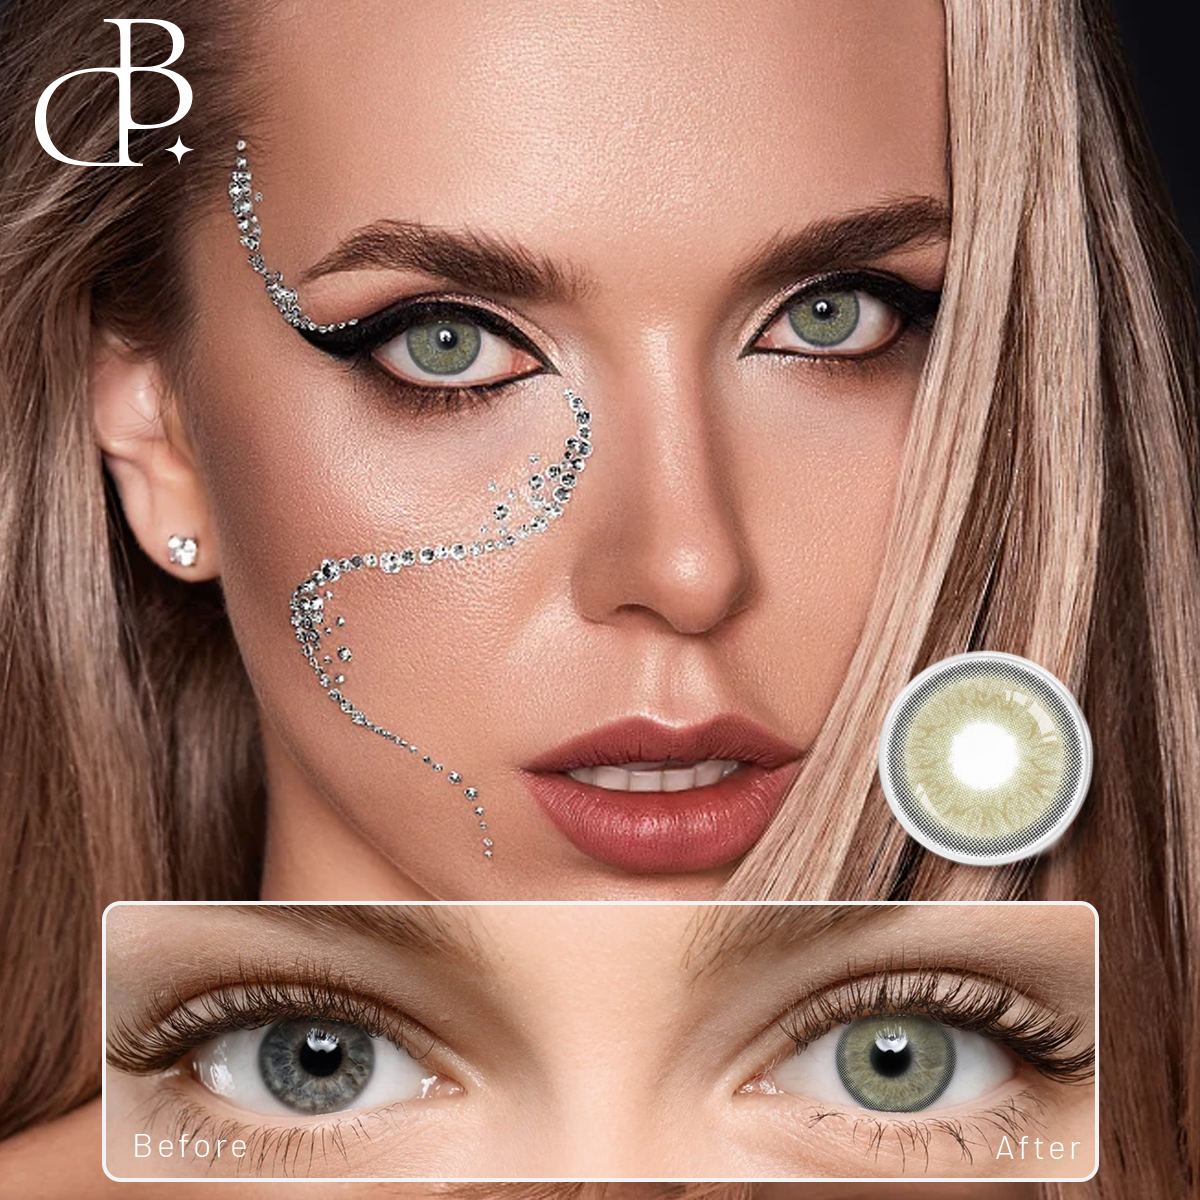 Dbeyes 3 tone yearly contact lenses new style wholesale colored eye contact lenses